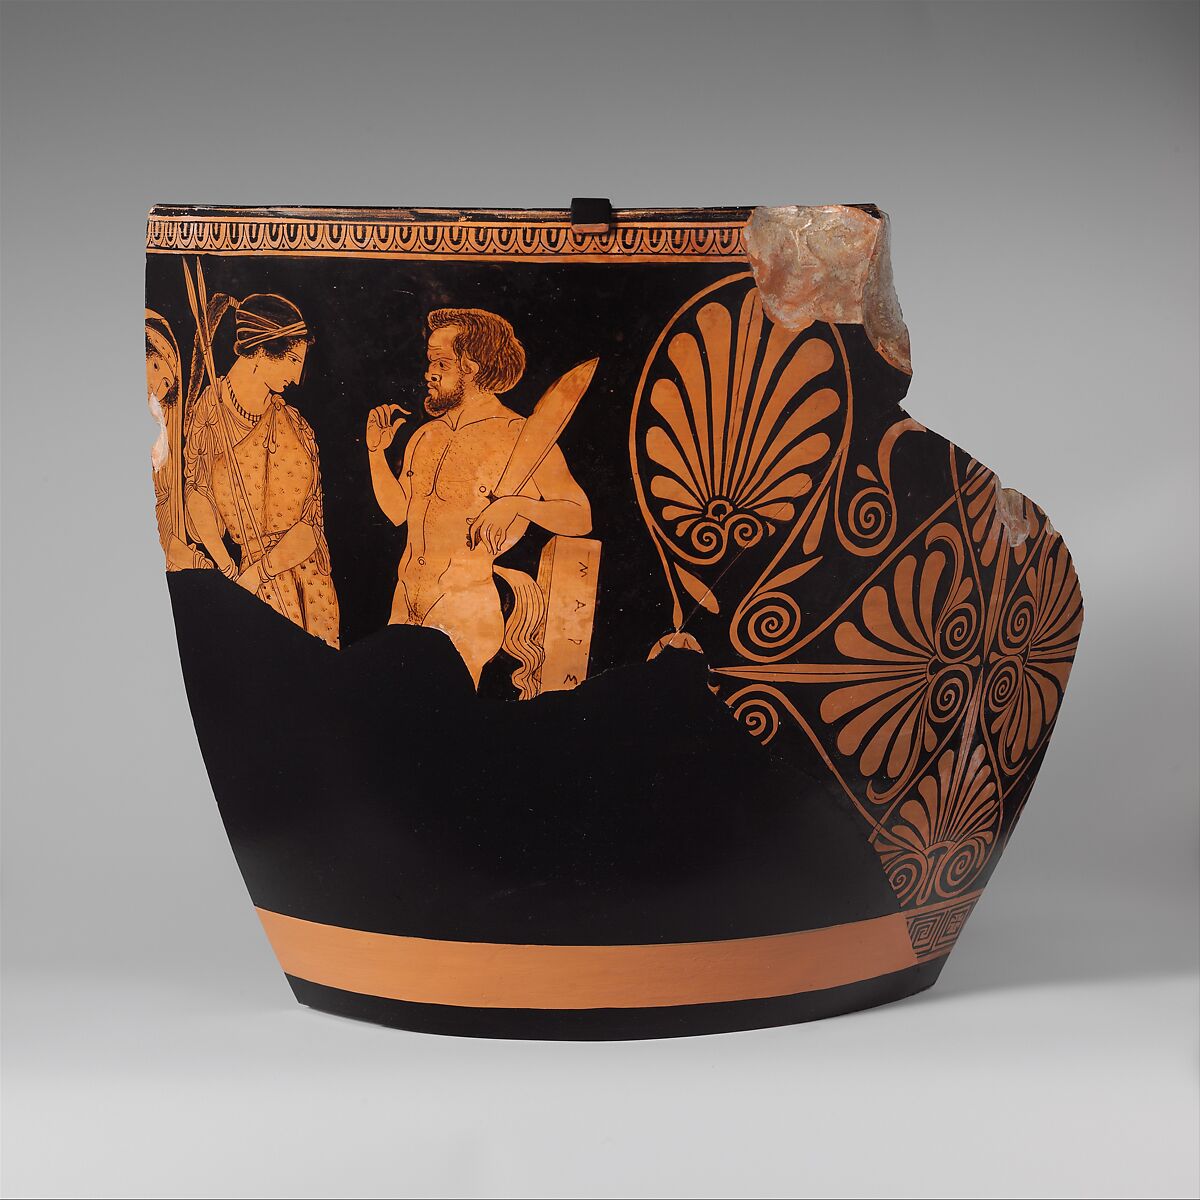 Two fragments of a terracotta skyphos (deep drinking cup), Attributed to the Palermo Painter, Terracotta, Greek, South Italian, Lucanian 